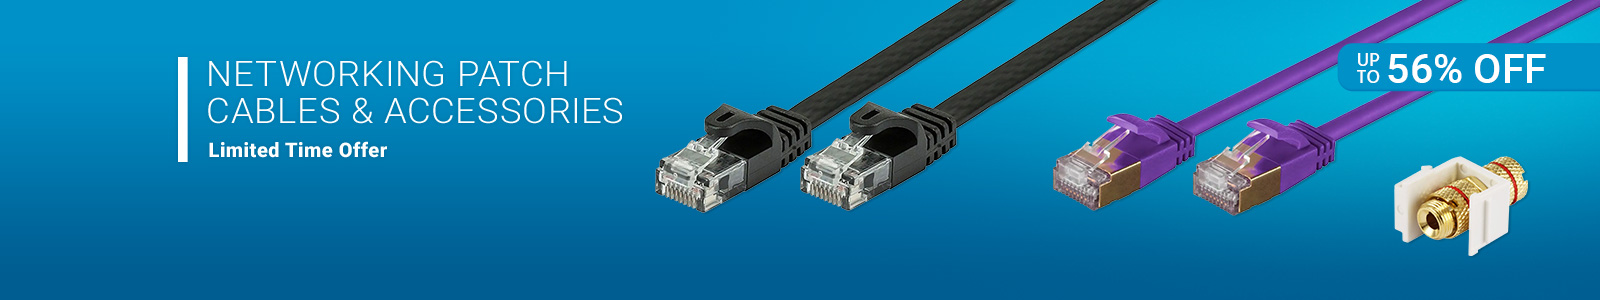 Up to 56% off
Networking Patch Cables & Accessories
Limited Time Offer
Shop Now